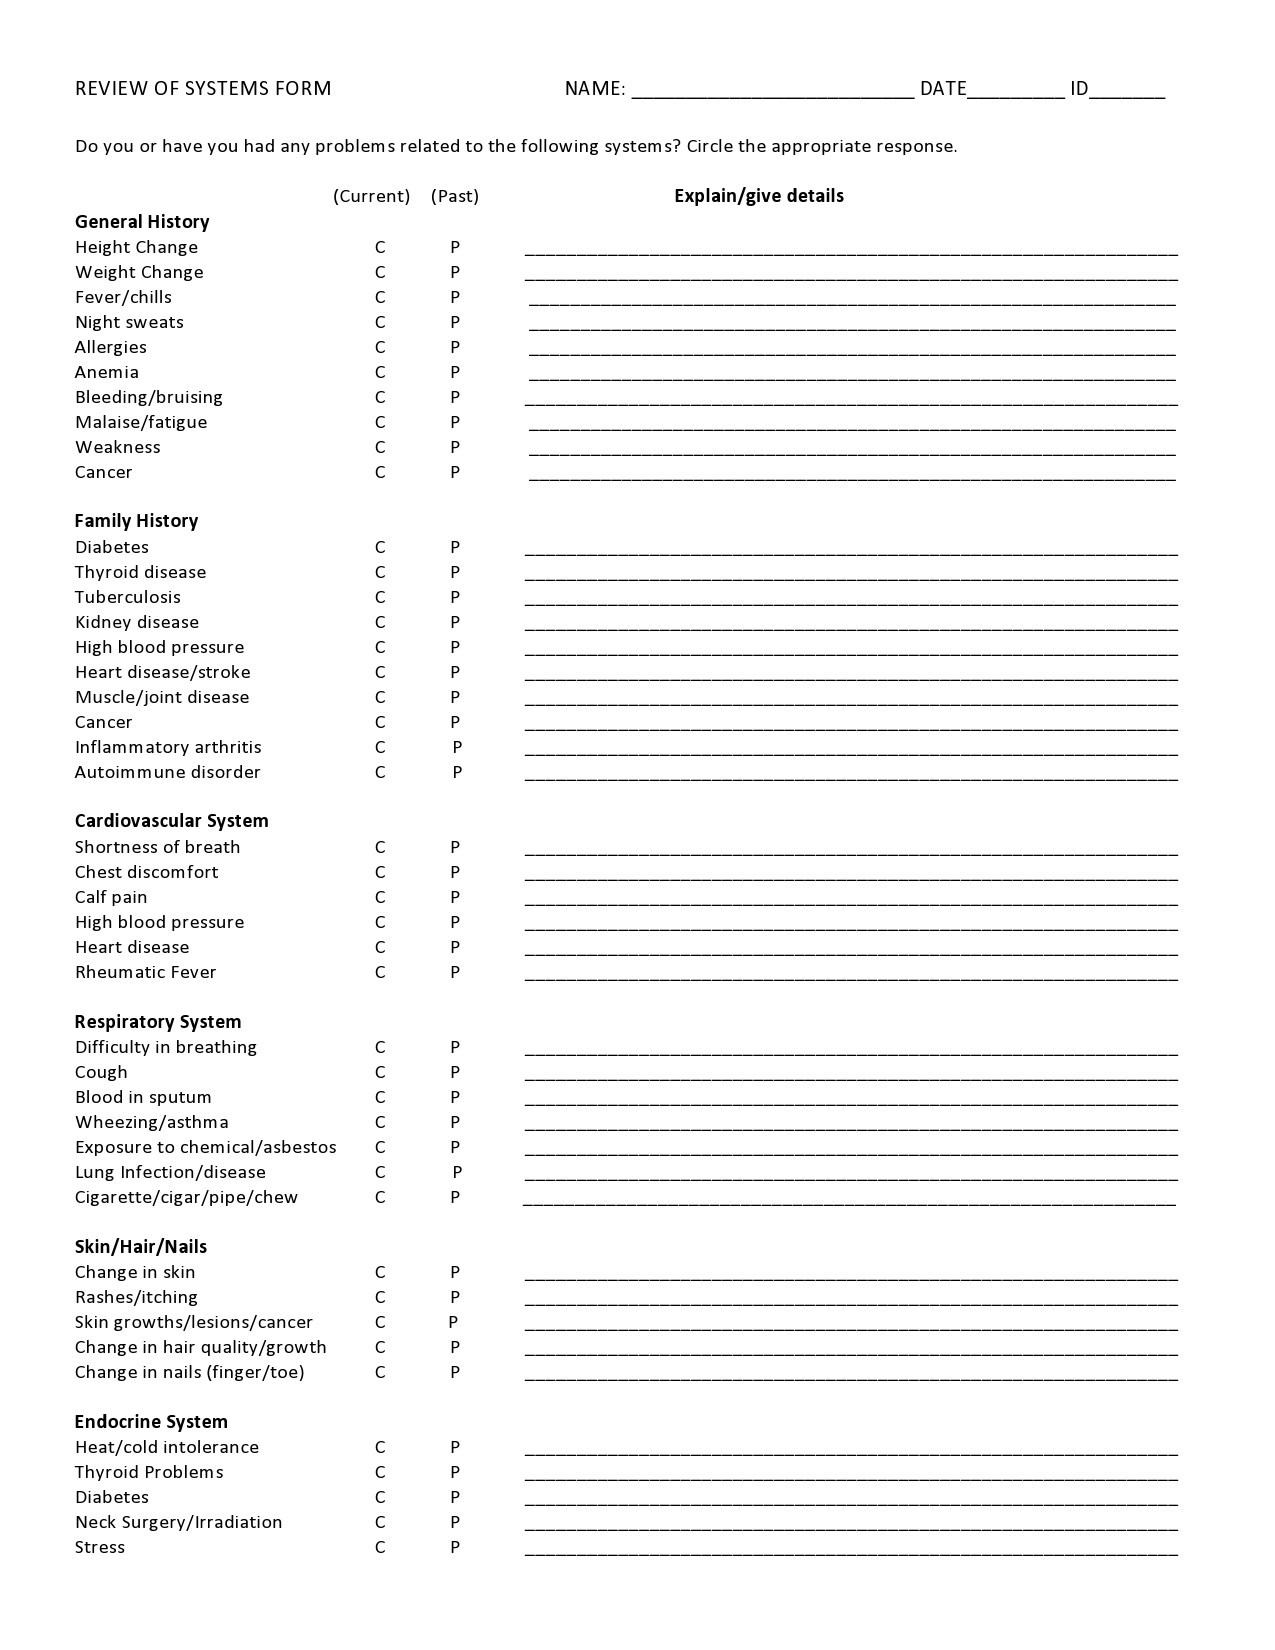 Free review of systems template 20